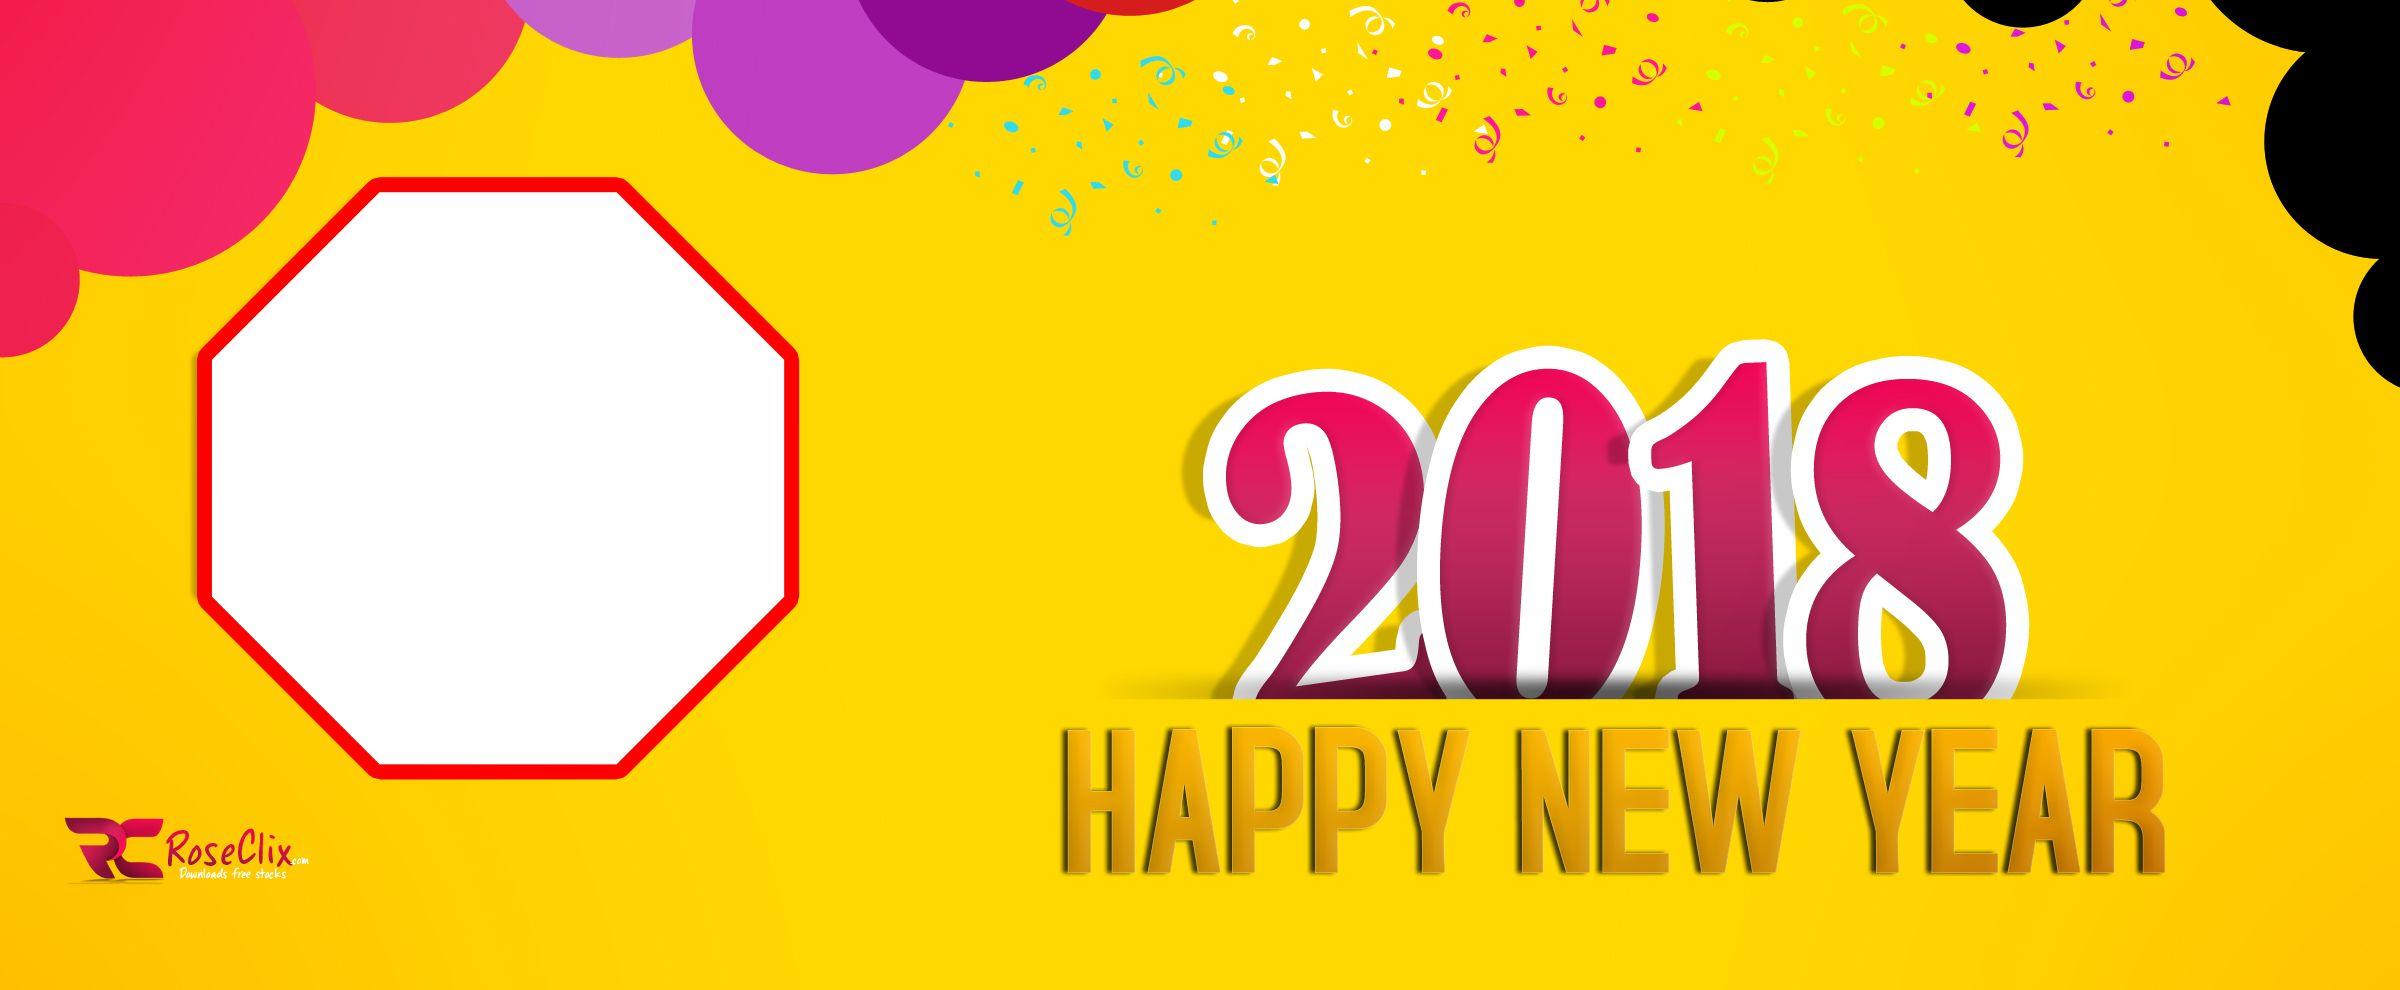 Happy New Year 2018 Fb Photo Cover Fb Cover